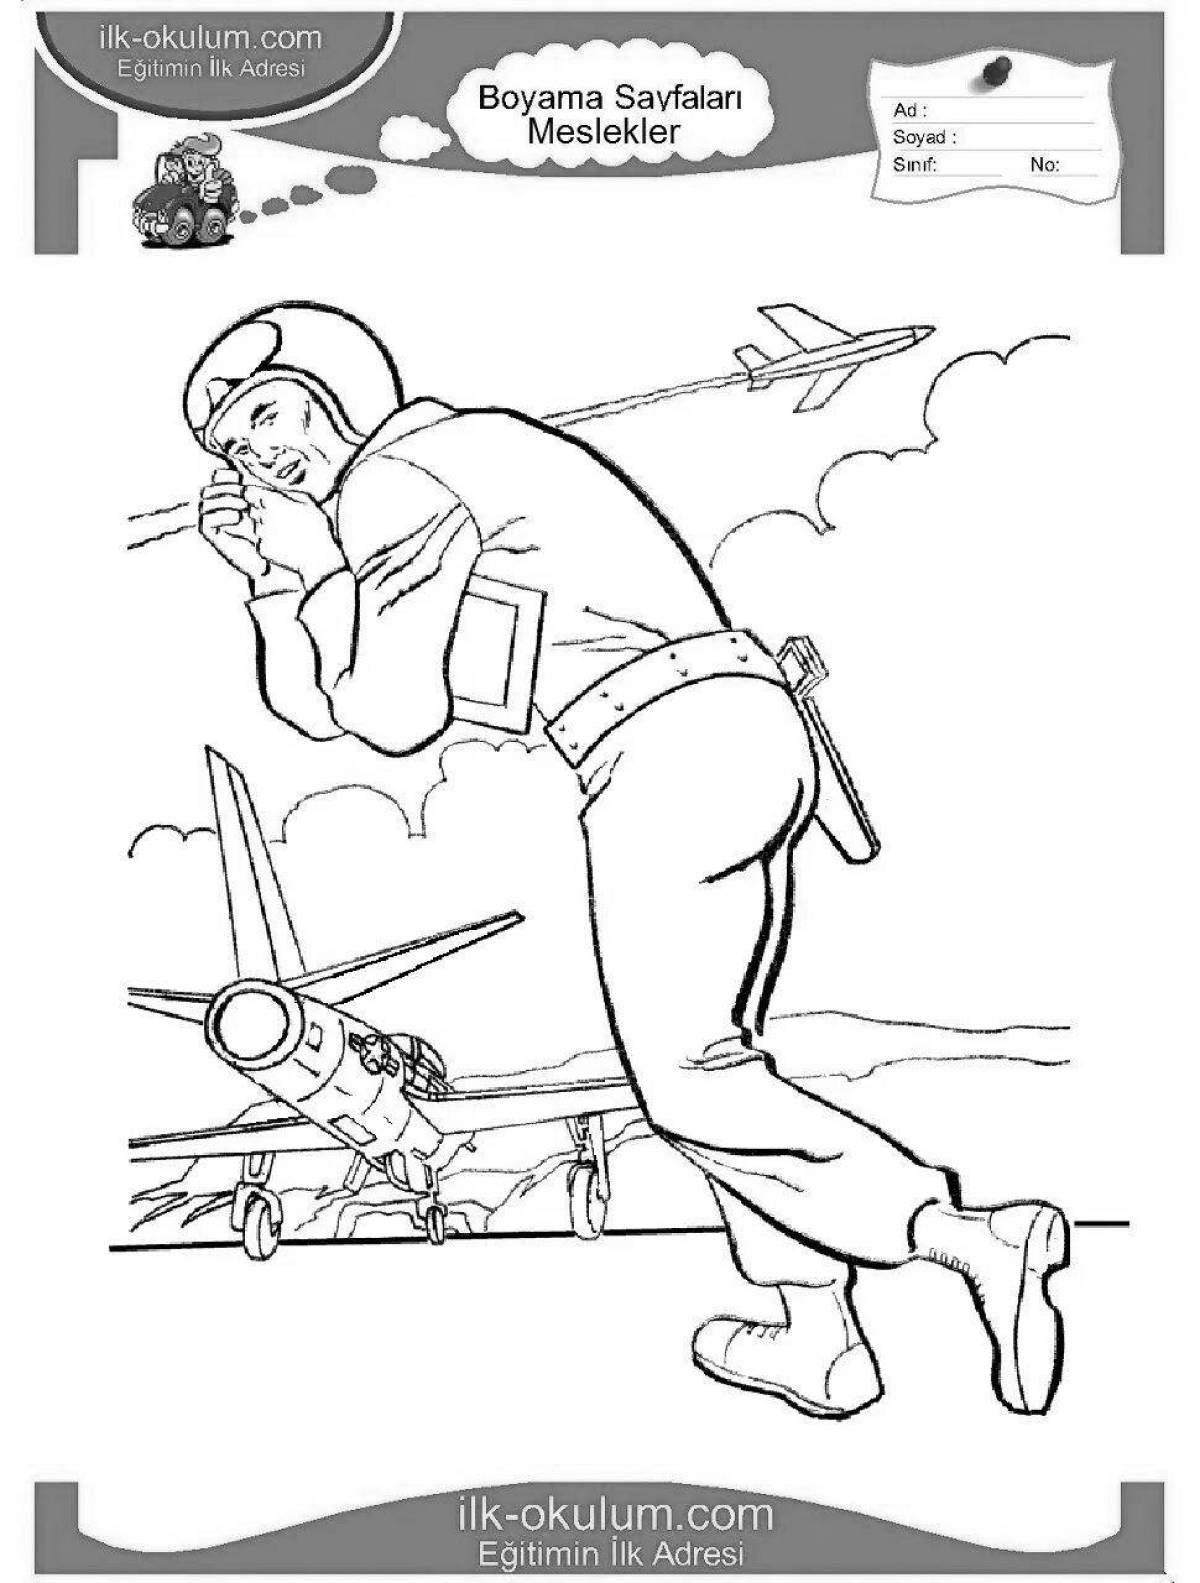 Coloring quirky military pilot for kids